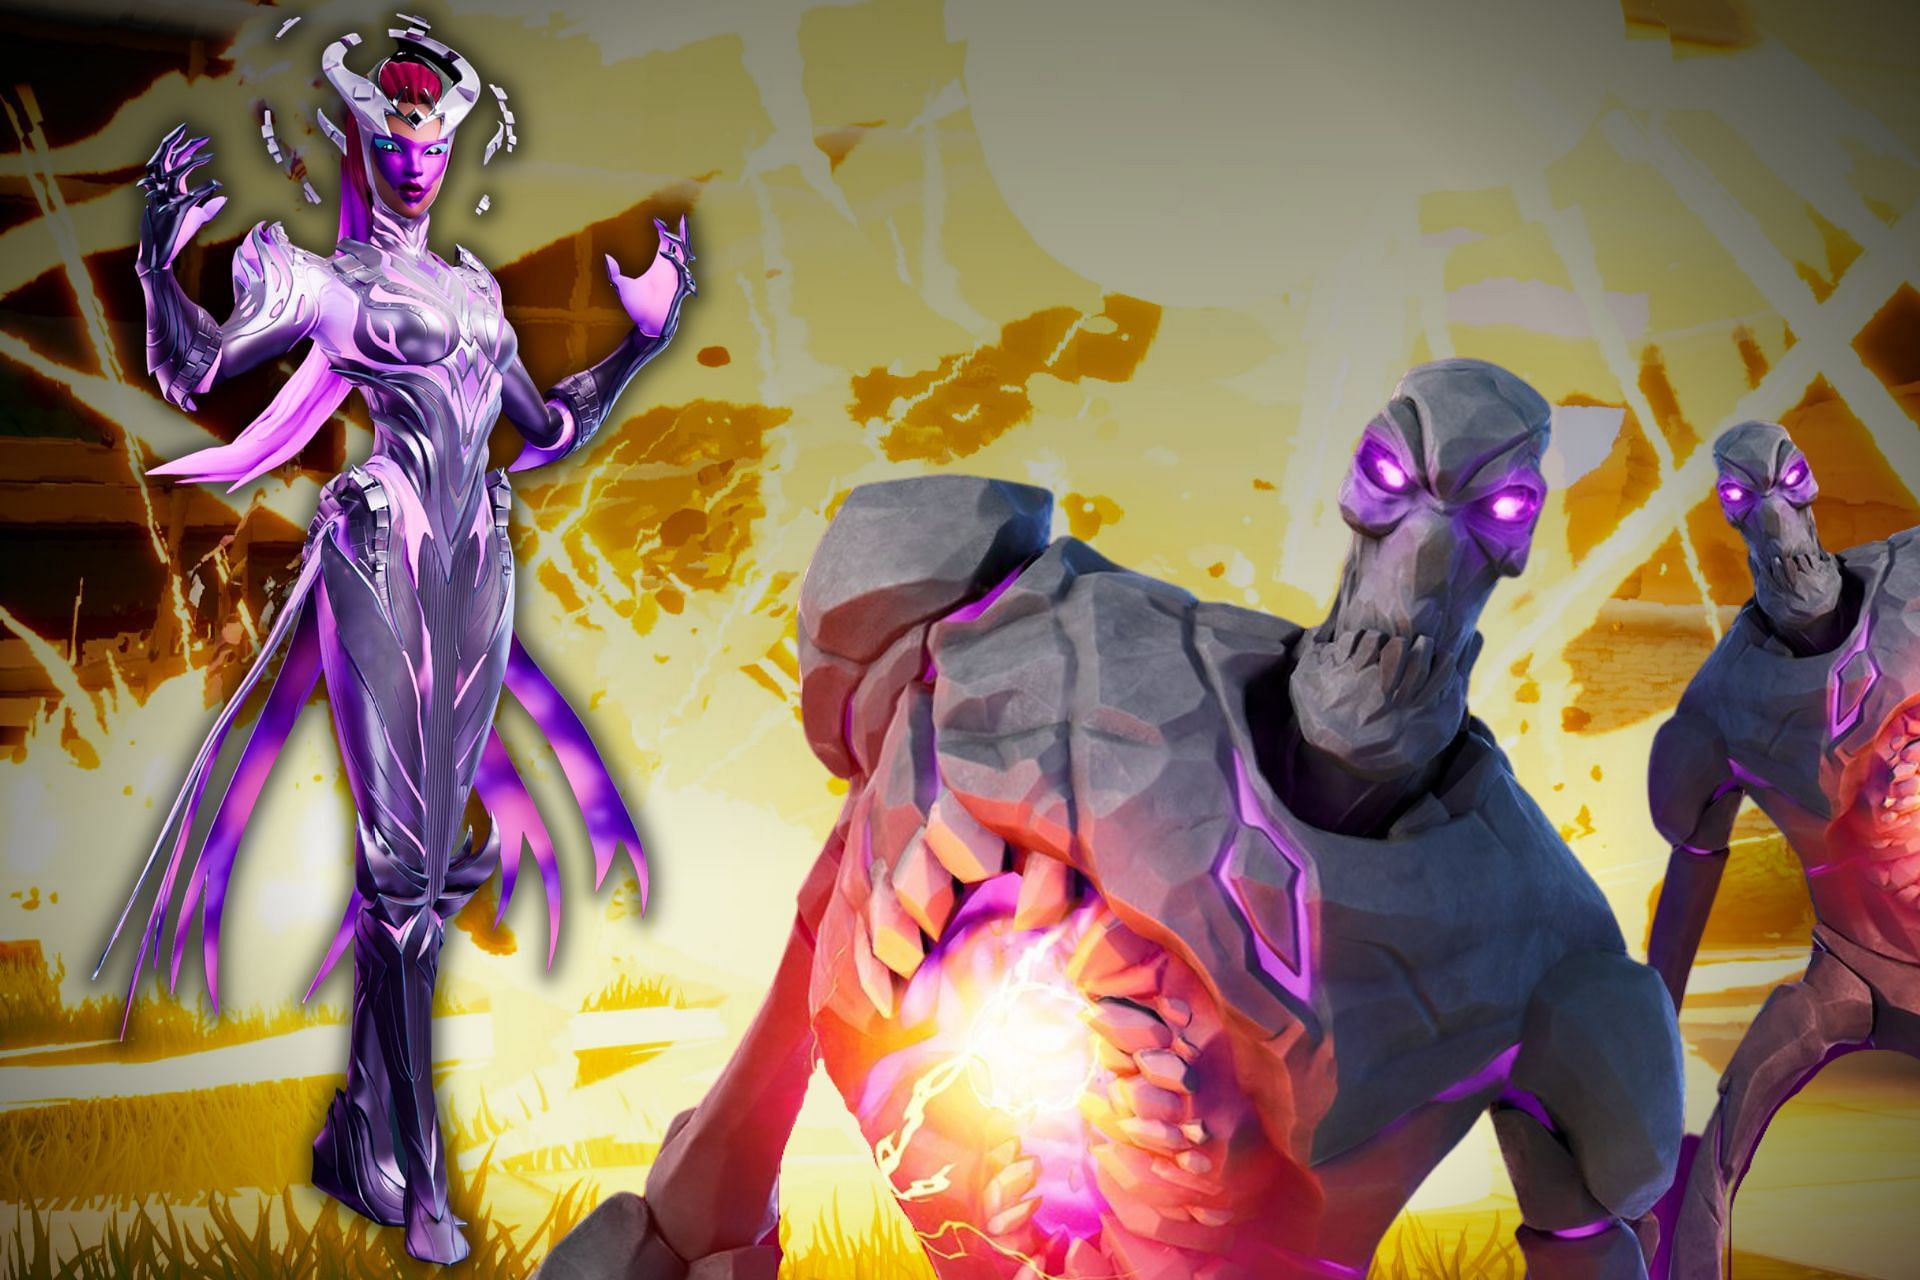 Unlock the Cube Queen from the Season 8 Battle Pass in Fortnite after completing multiple challenges present in the game (Image via Sportskeeda)